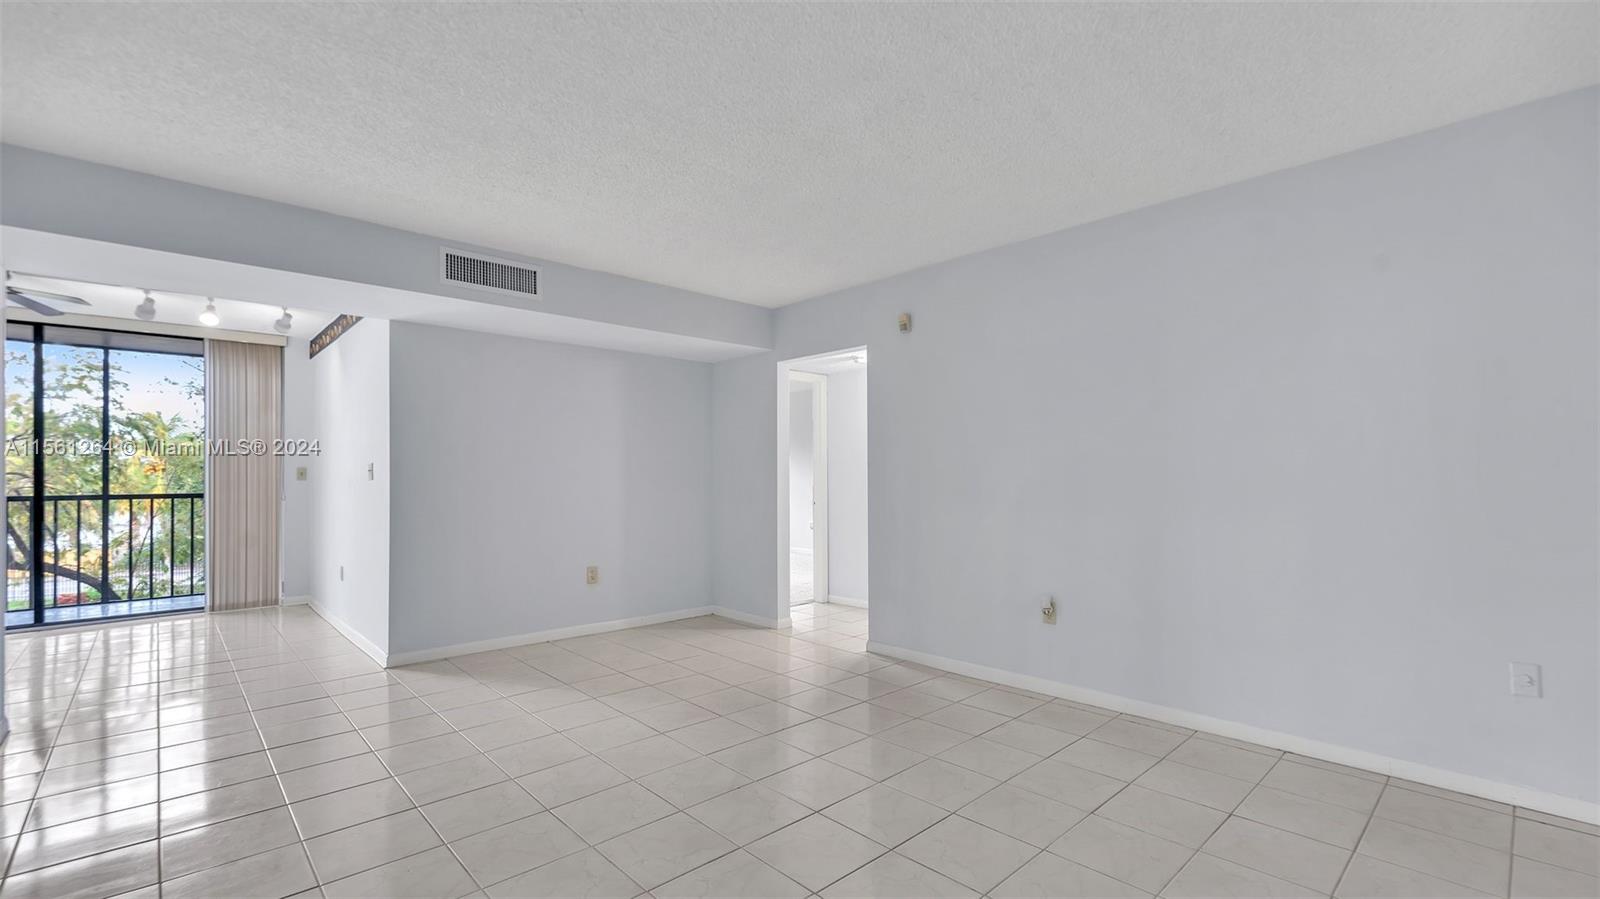 Property for Sale at 8500 Sw 133rd Ave Rd Rd 302, Miami, Broward County, Florida - Bedrooms: 3 
Bathrooms: 2  - $319,900